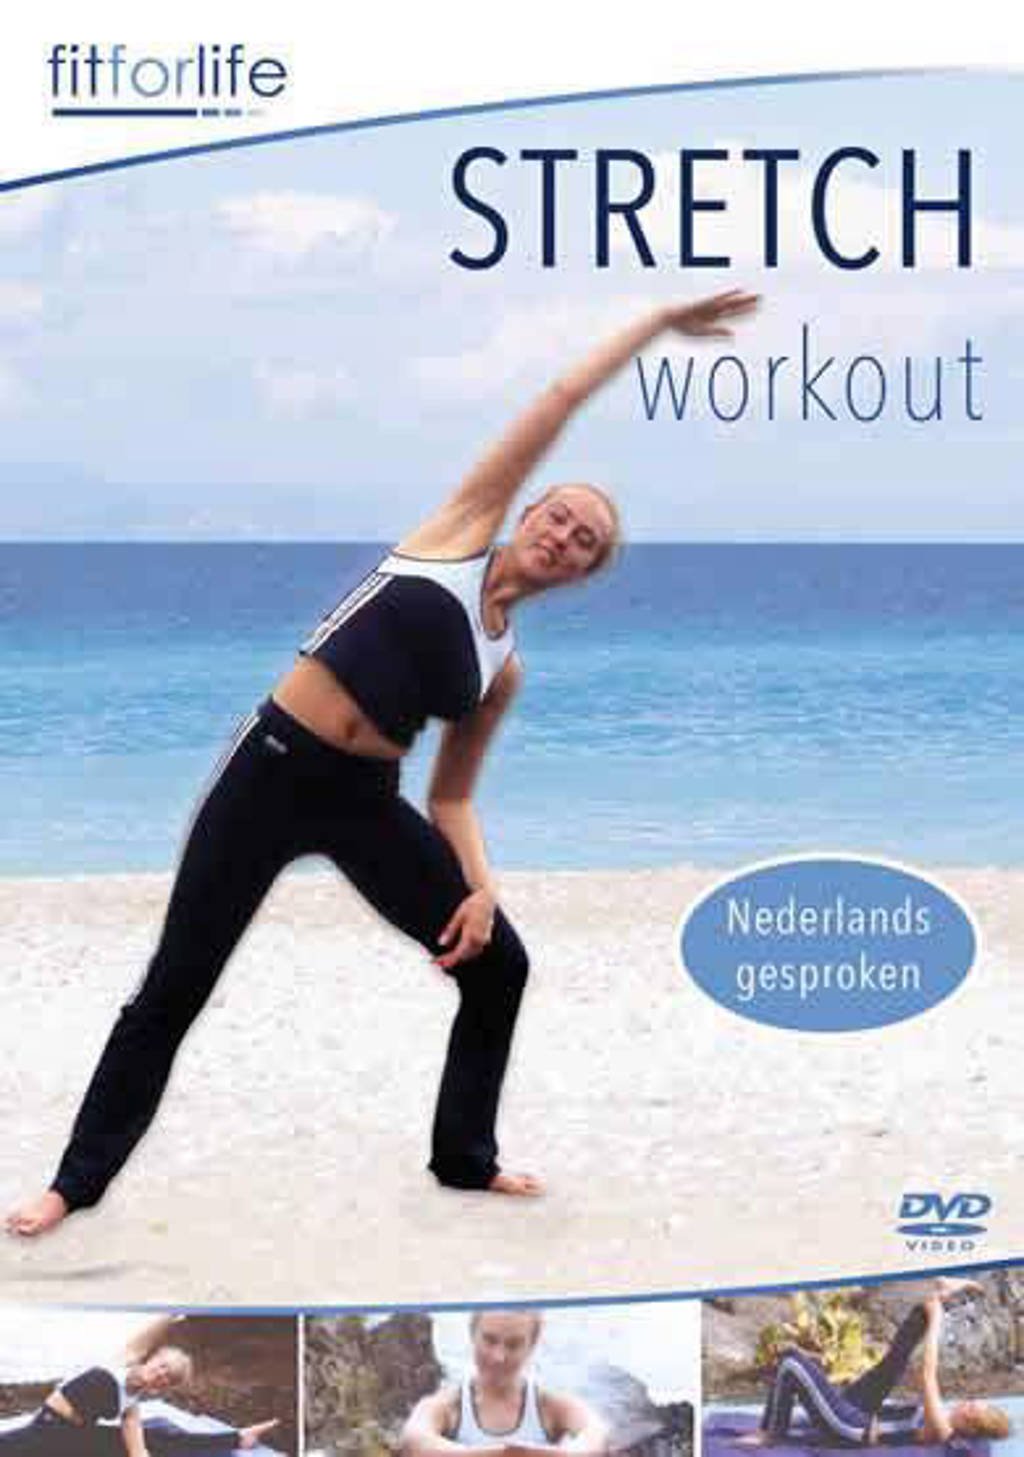 Fit For Life - Stretch Workout (DVD)